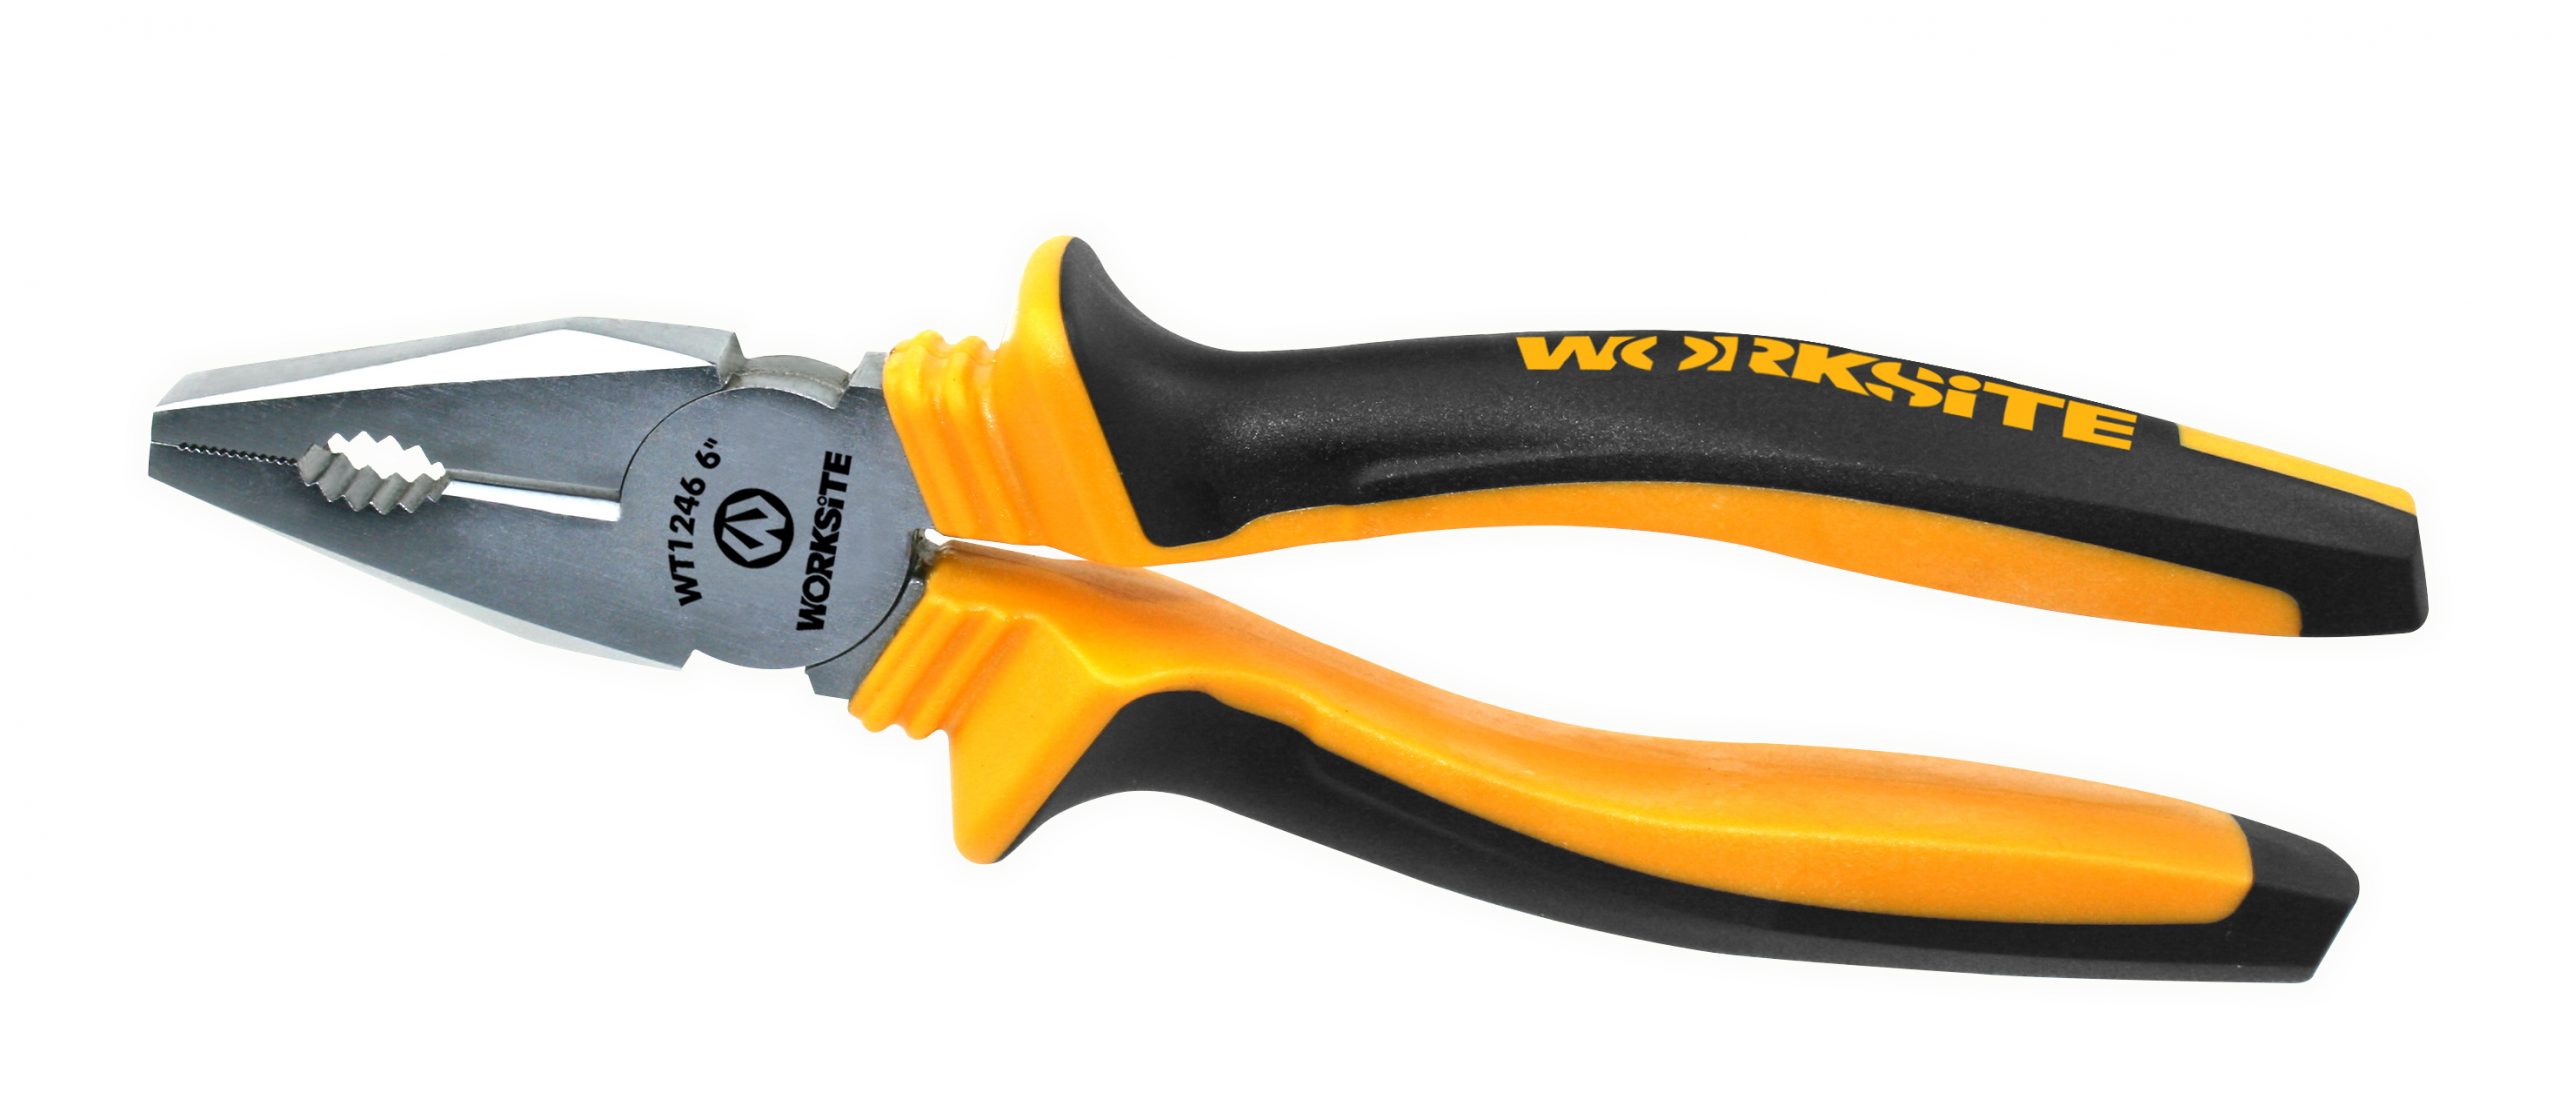 Worksite Combination Lineman’s Pliers 7 inches (180mm) with Wire Cutter, Steel Construction Professional Handle WT1247